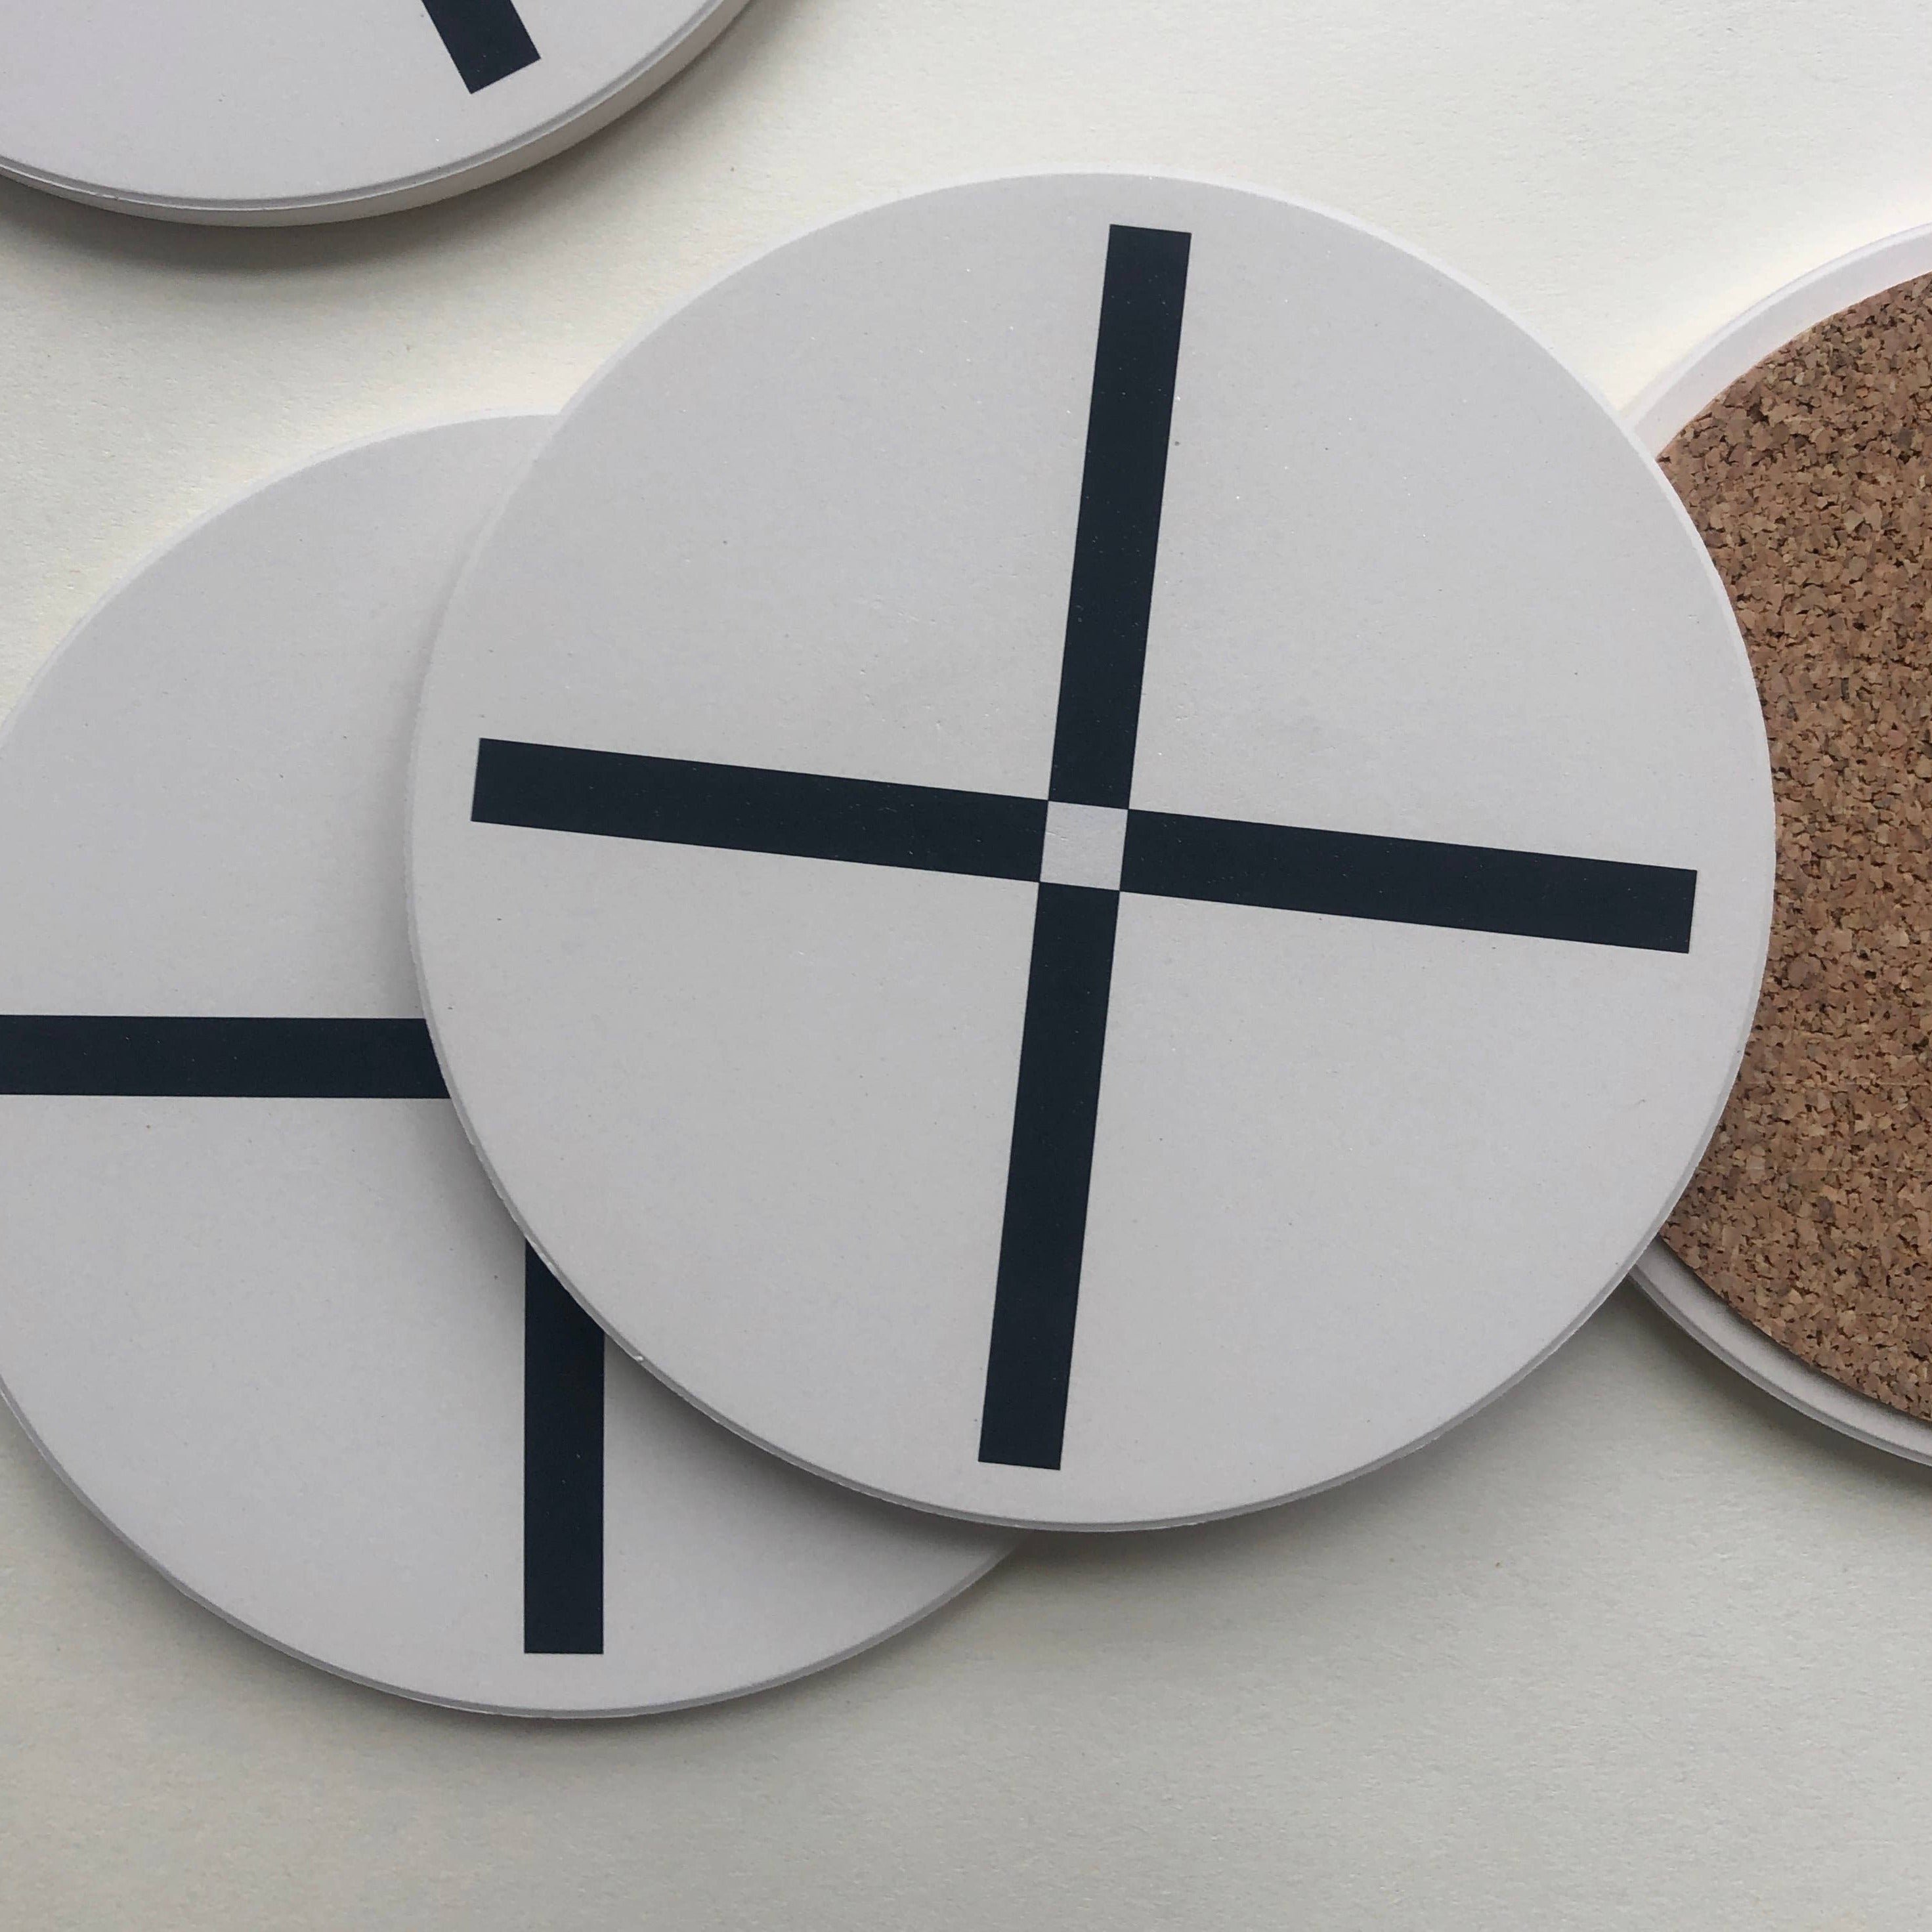 Plus Absorbent Stone Coasters